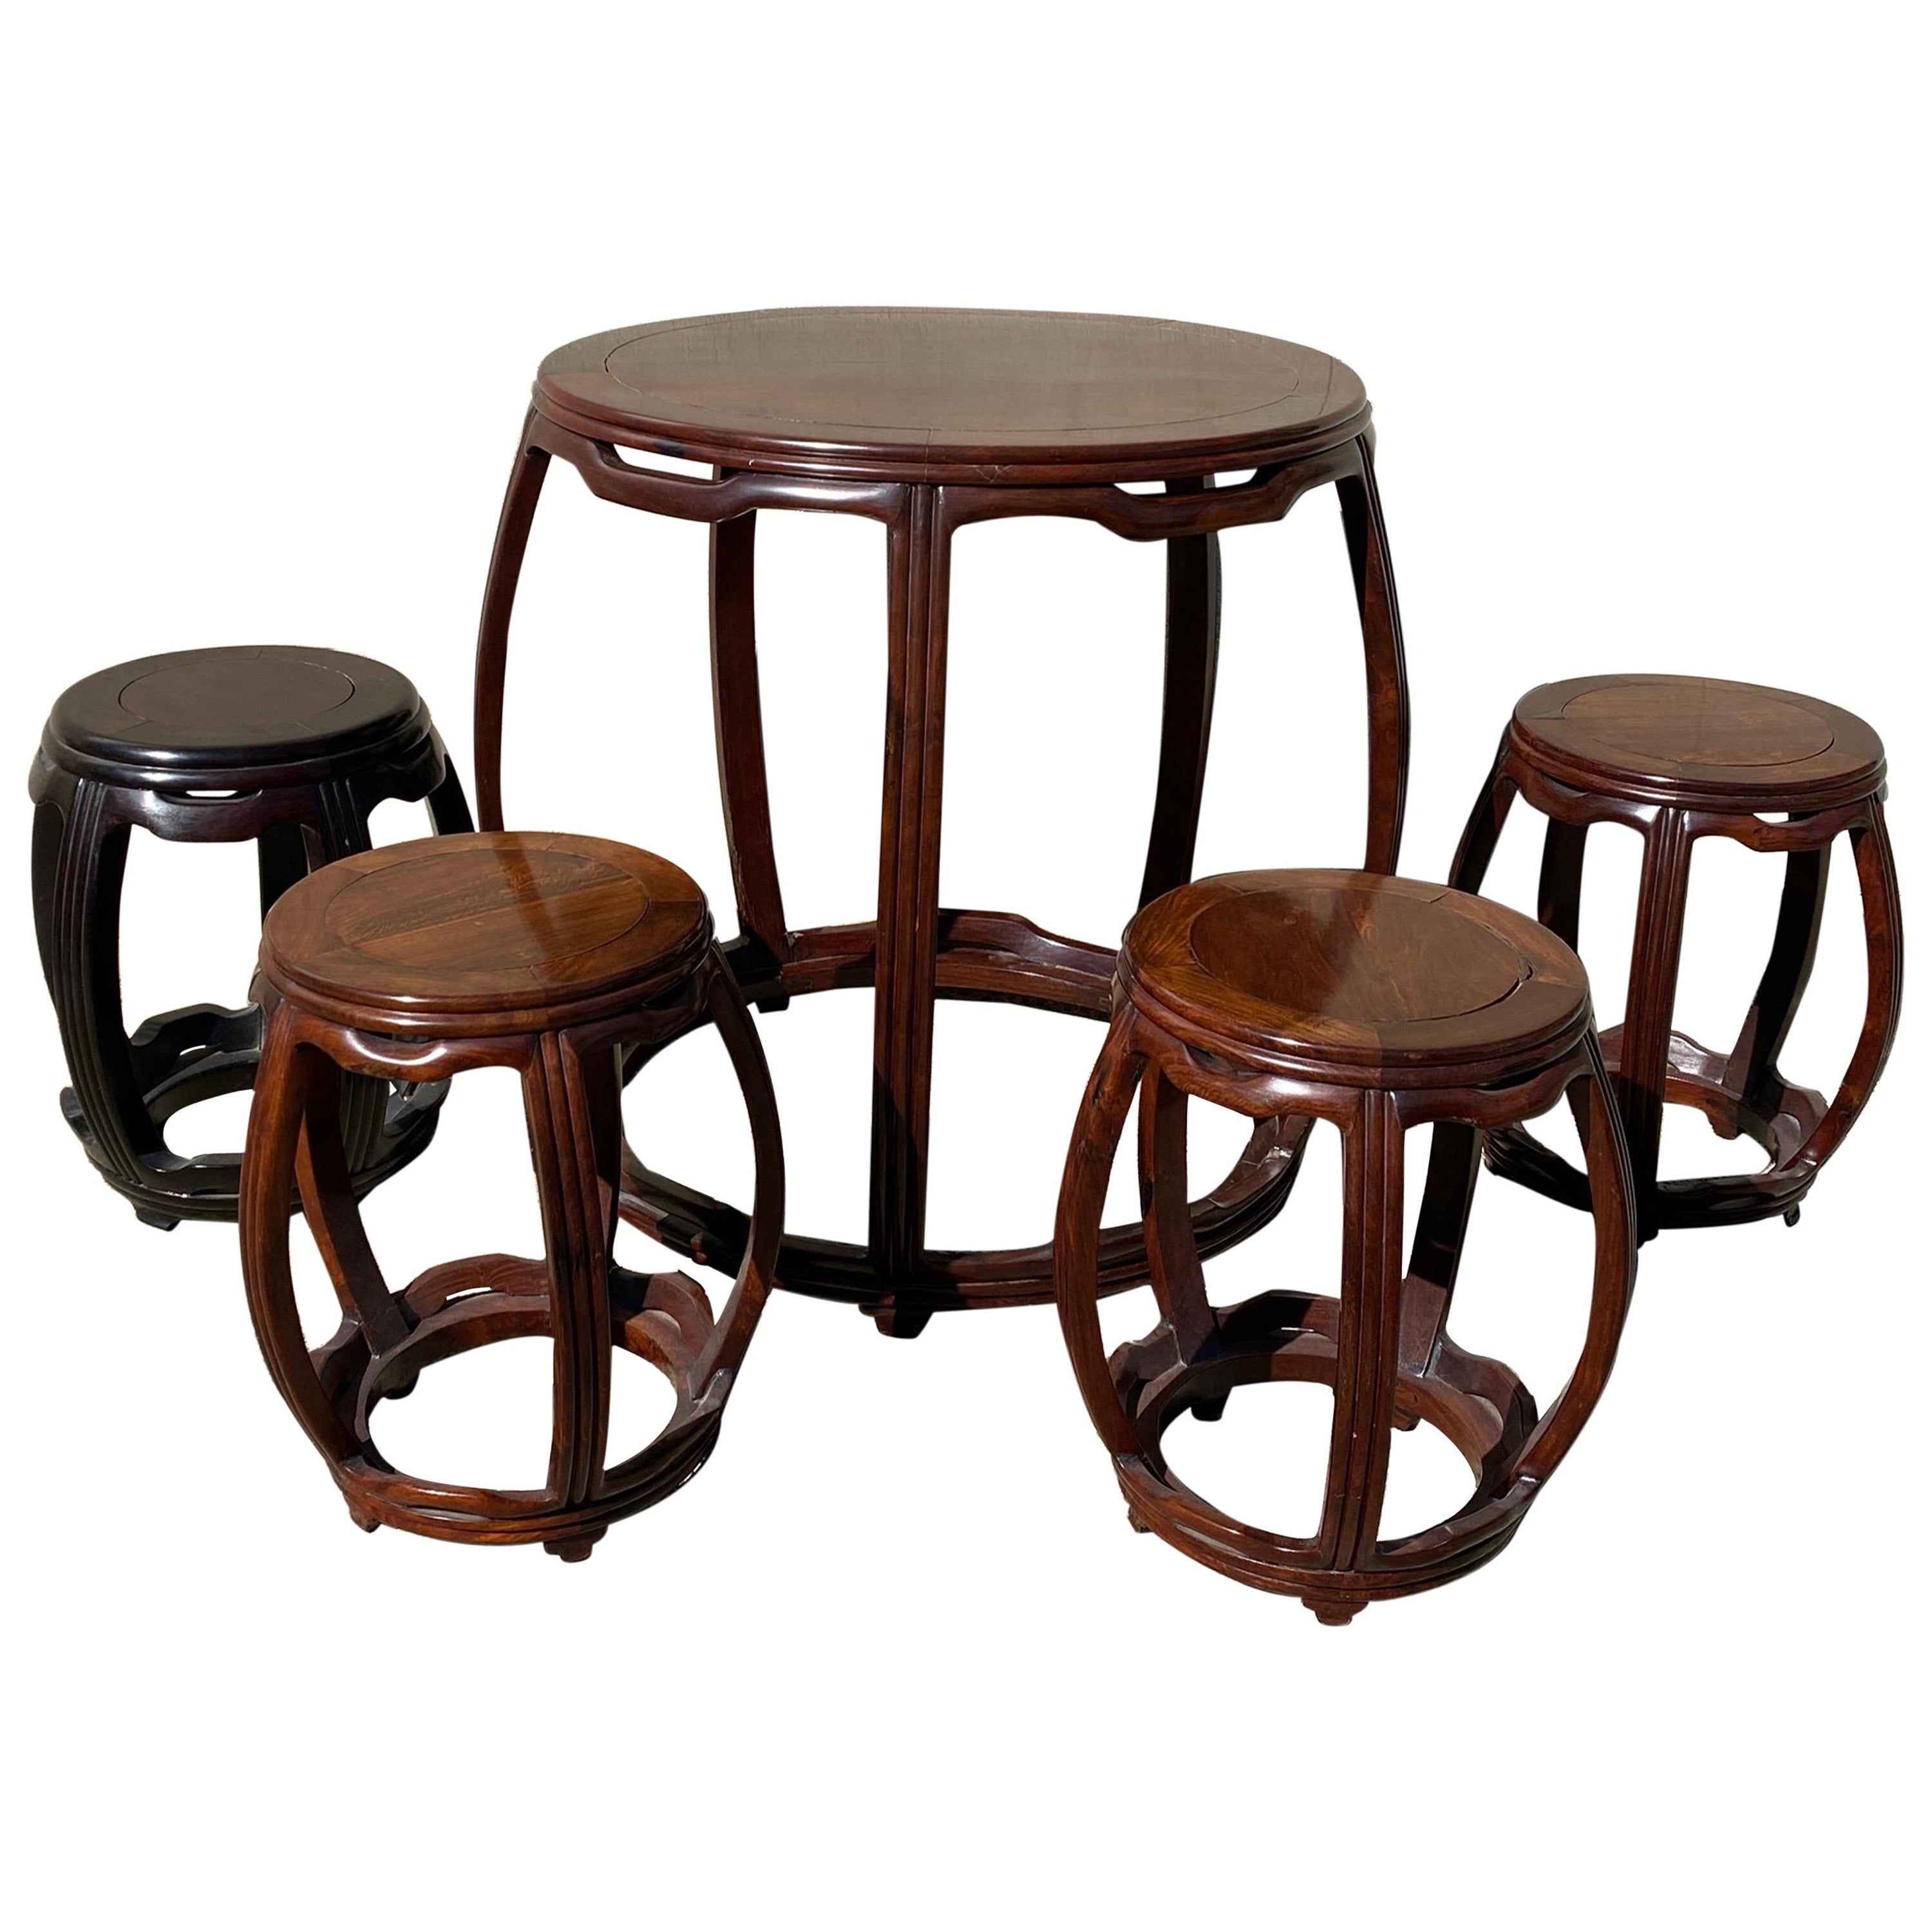 Early 20th Century Set of Chinese Barrel Form Table with Stools